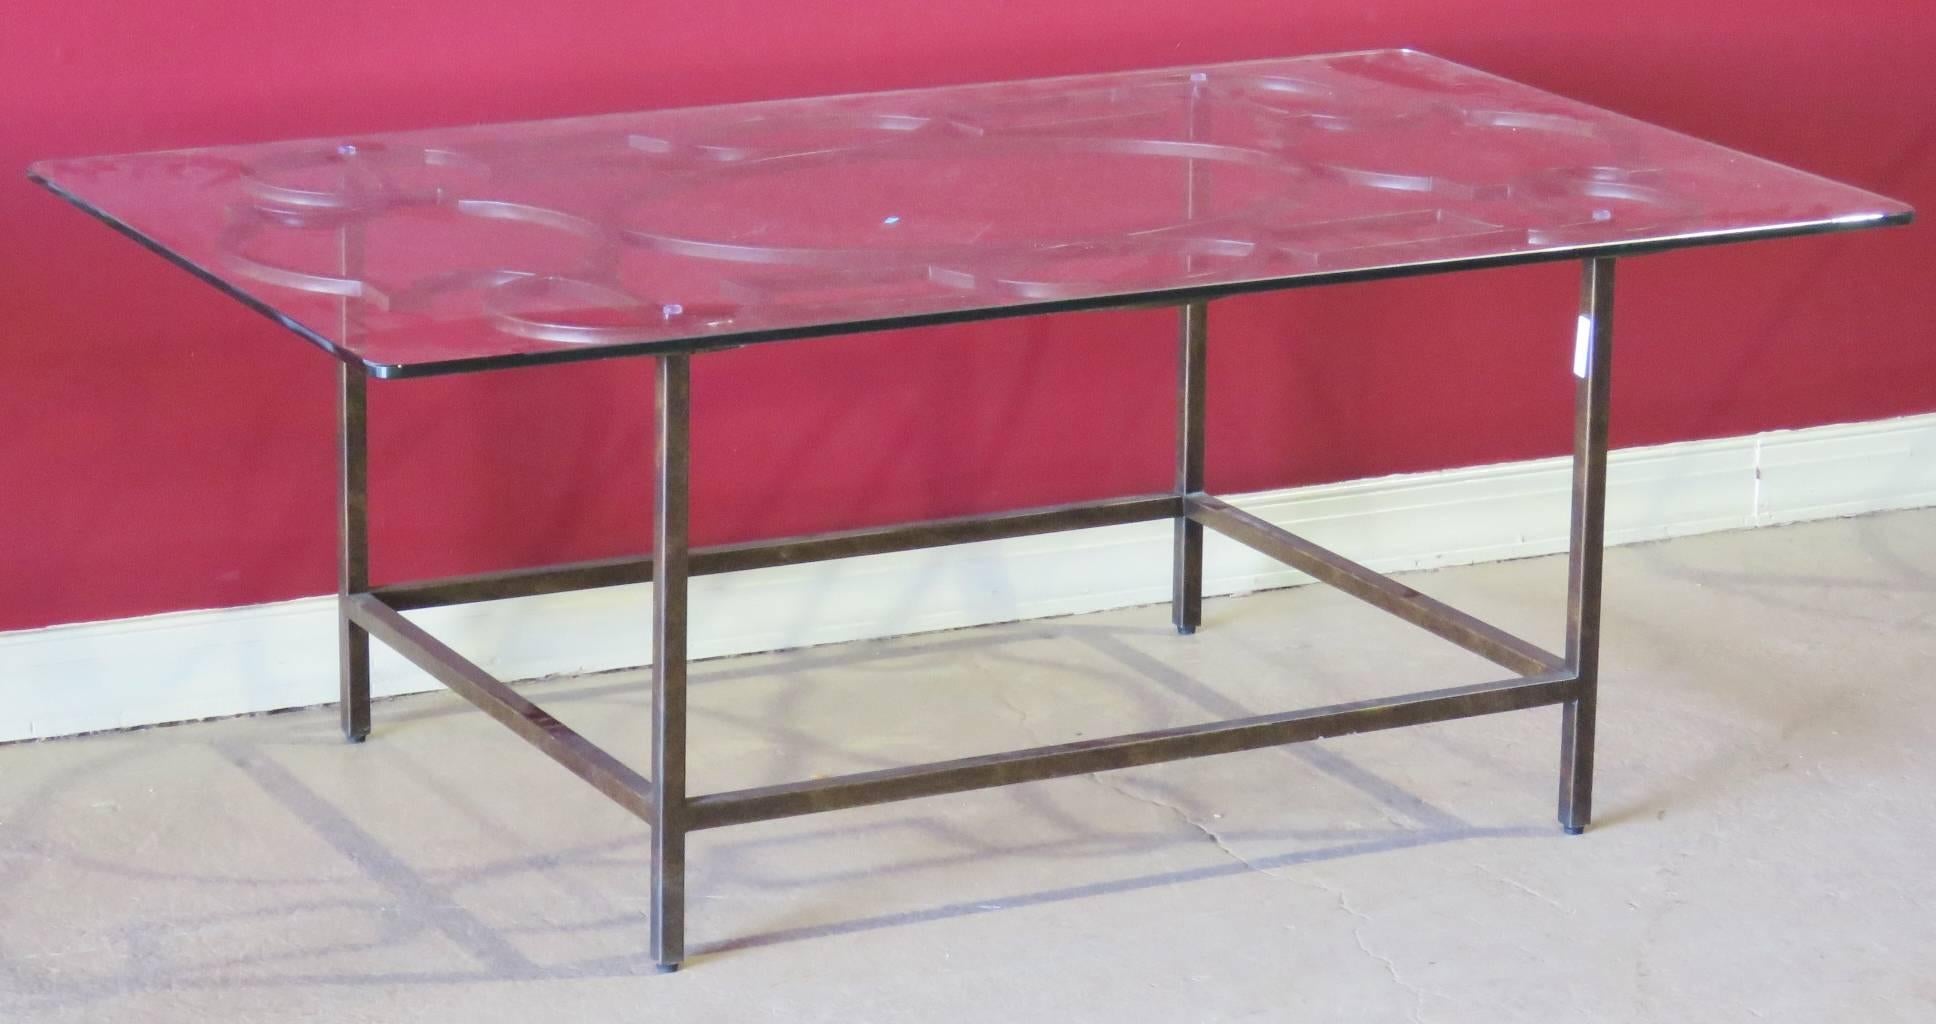 Square glass top with metal painted frame.